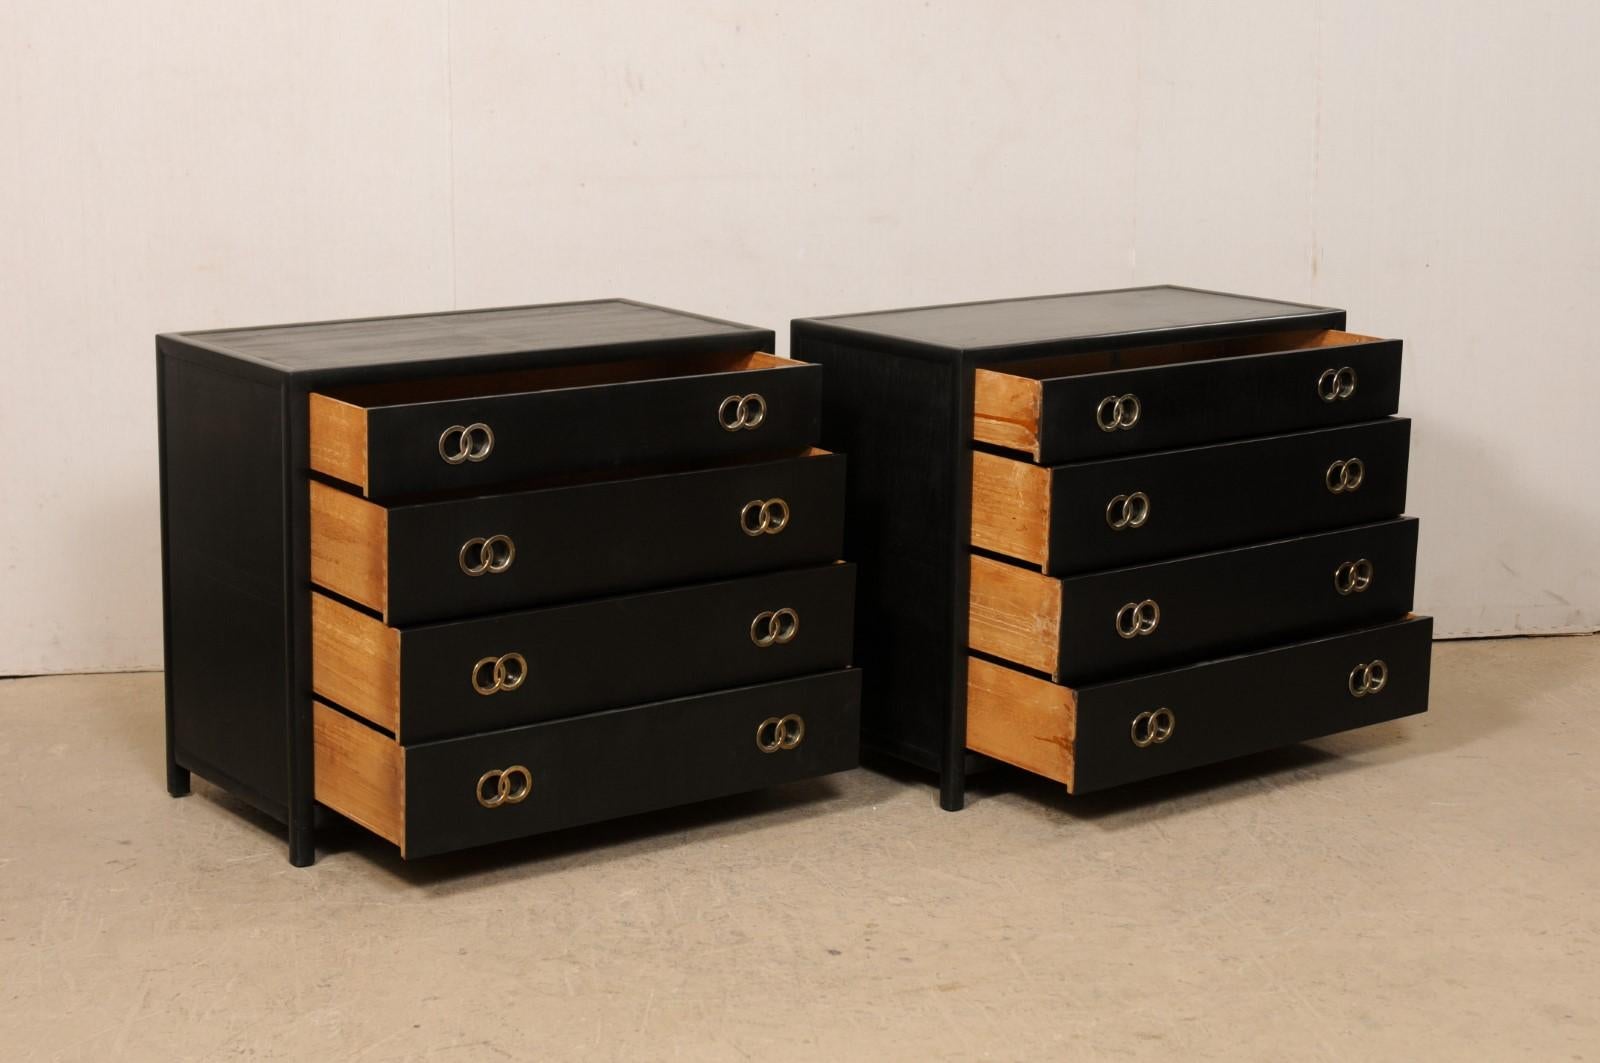 Pair Vintage Chest of Drawers in Black with Silver Hardware, Clean Modern Design In Good Condition For Sale In Atlanta, GA